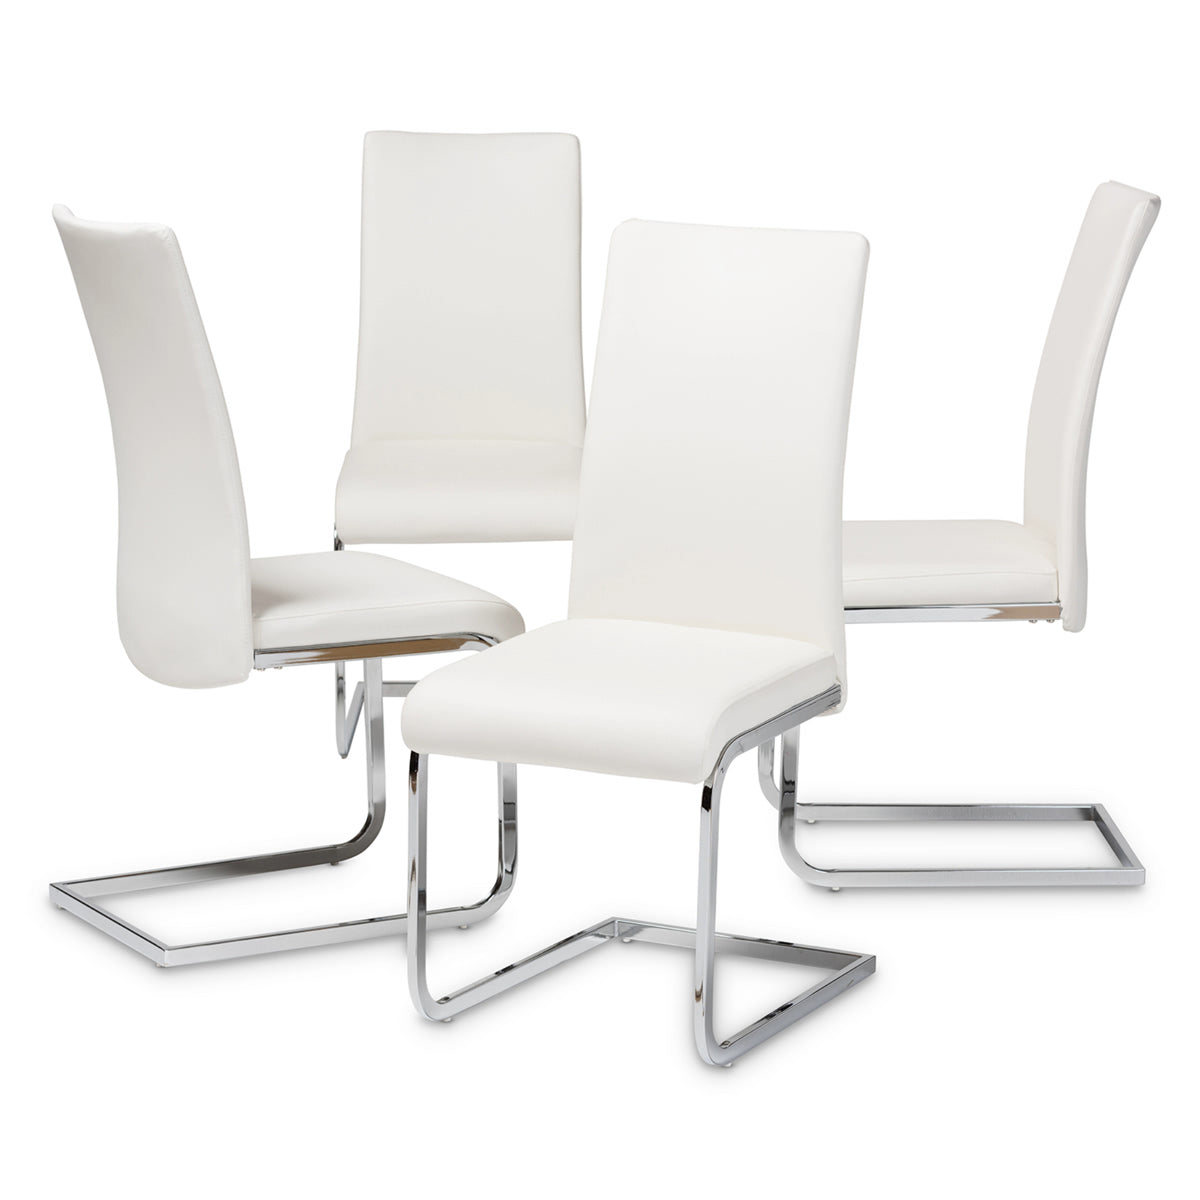 Baxton Studio Cyprien Modern and Contemporary White Faux Leather Upholstered Dining Chair (Set of 4) Baxton Studio-dining chair-Minimal And Modern - 1